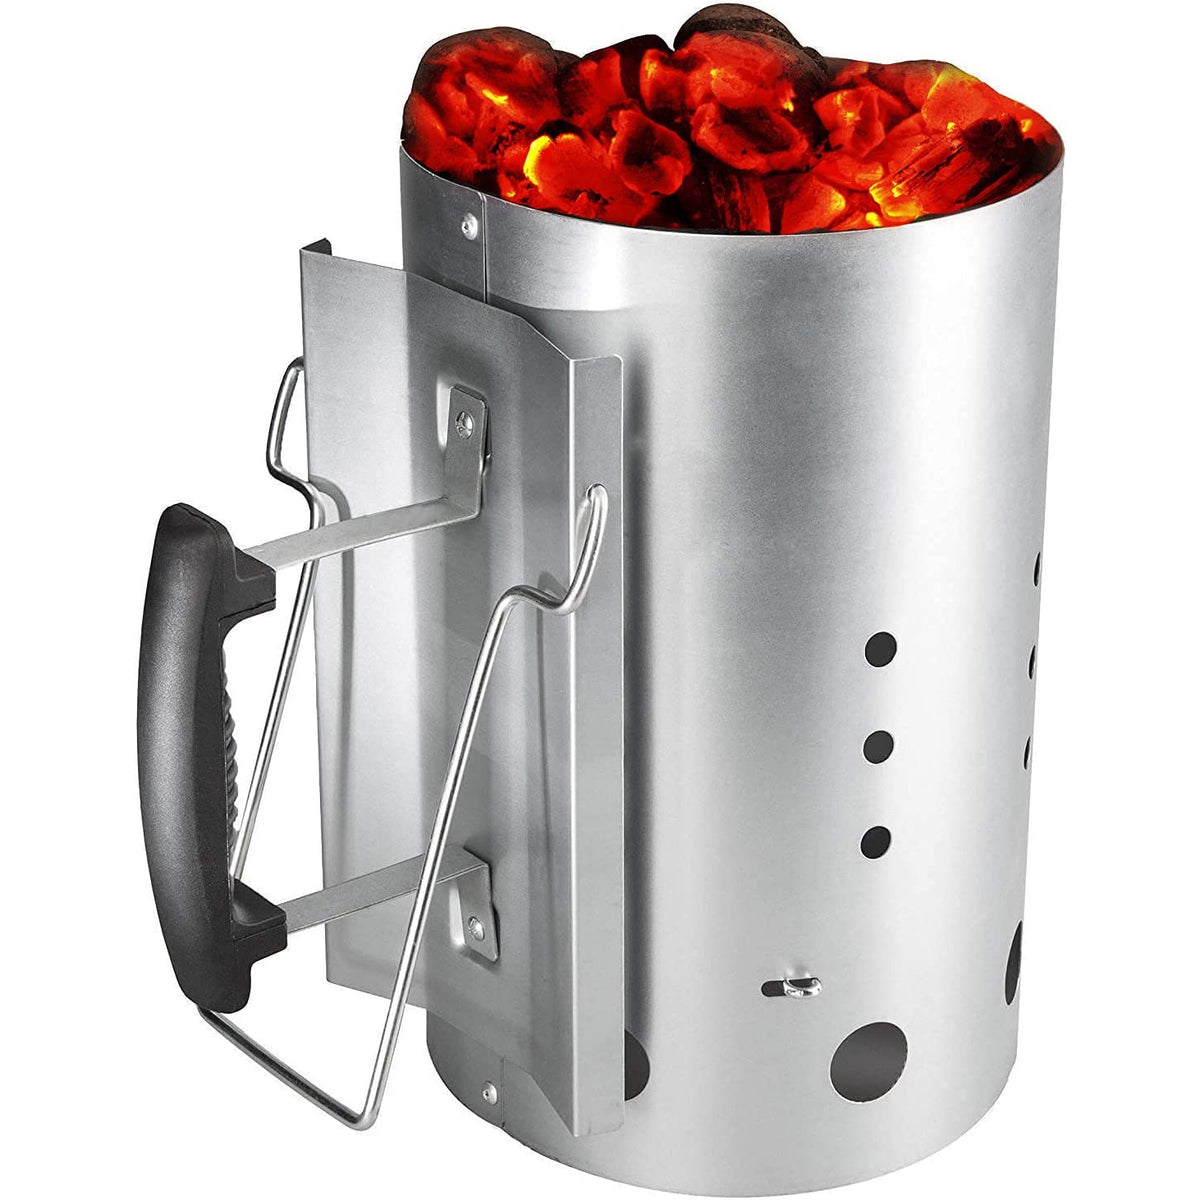 Charcoal Chimney Starter for Kamado Barbecues